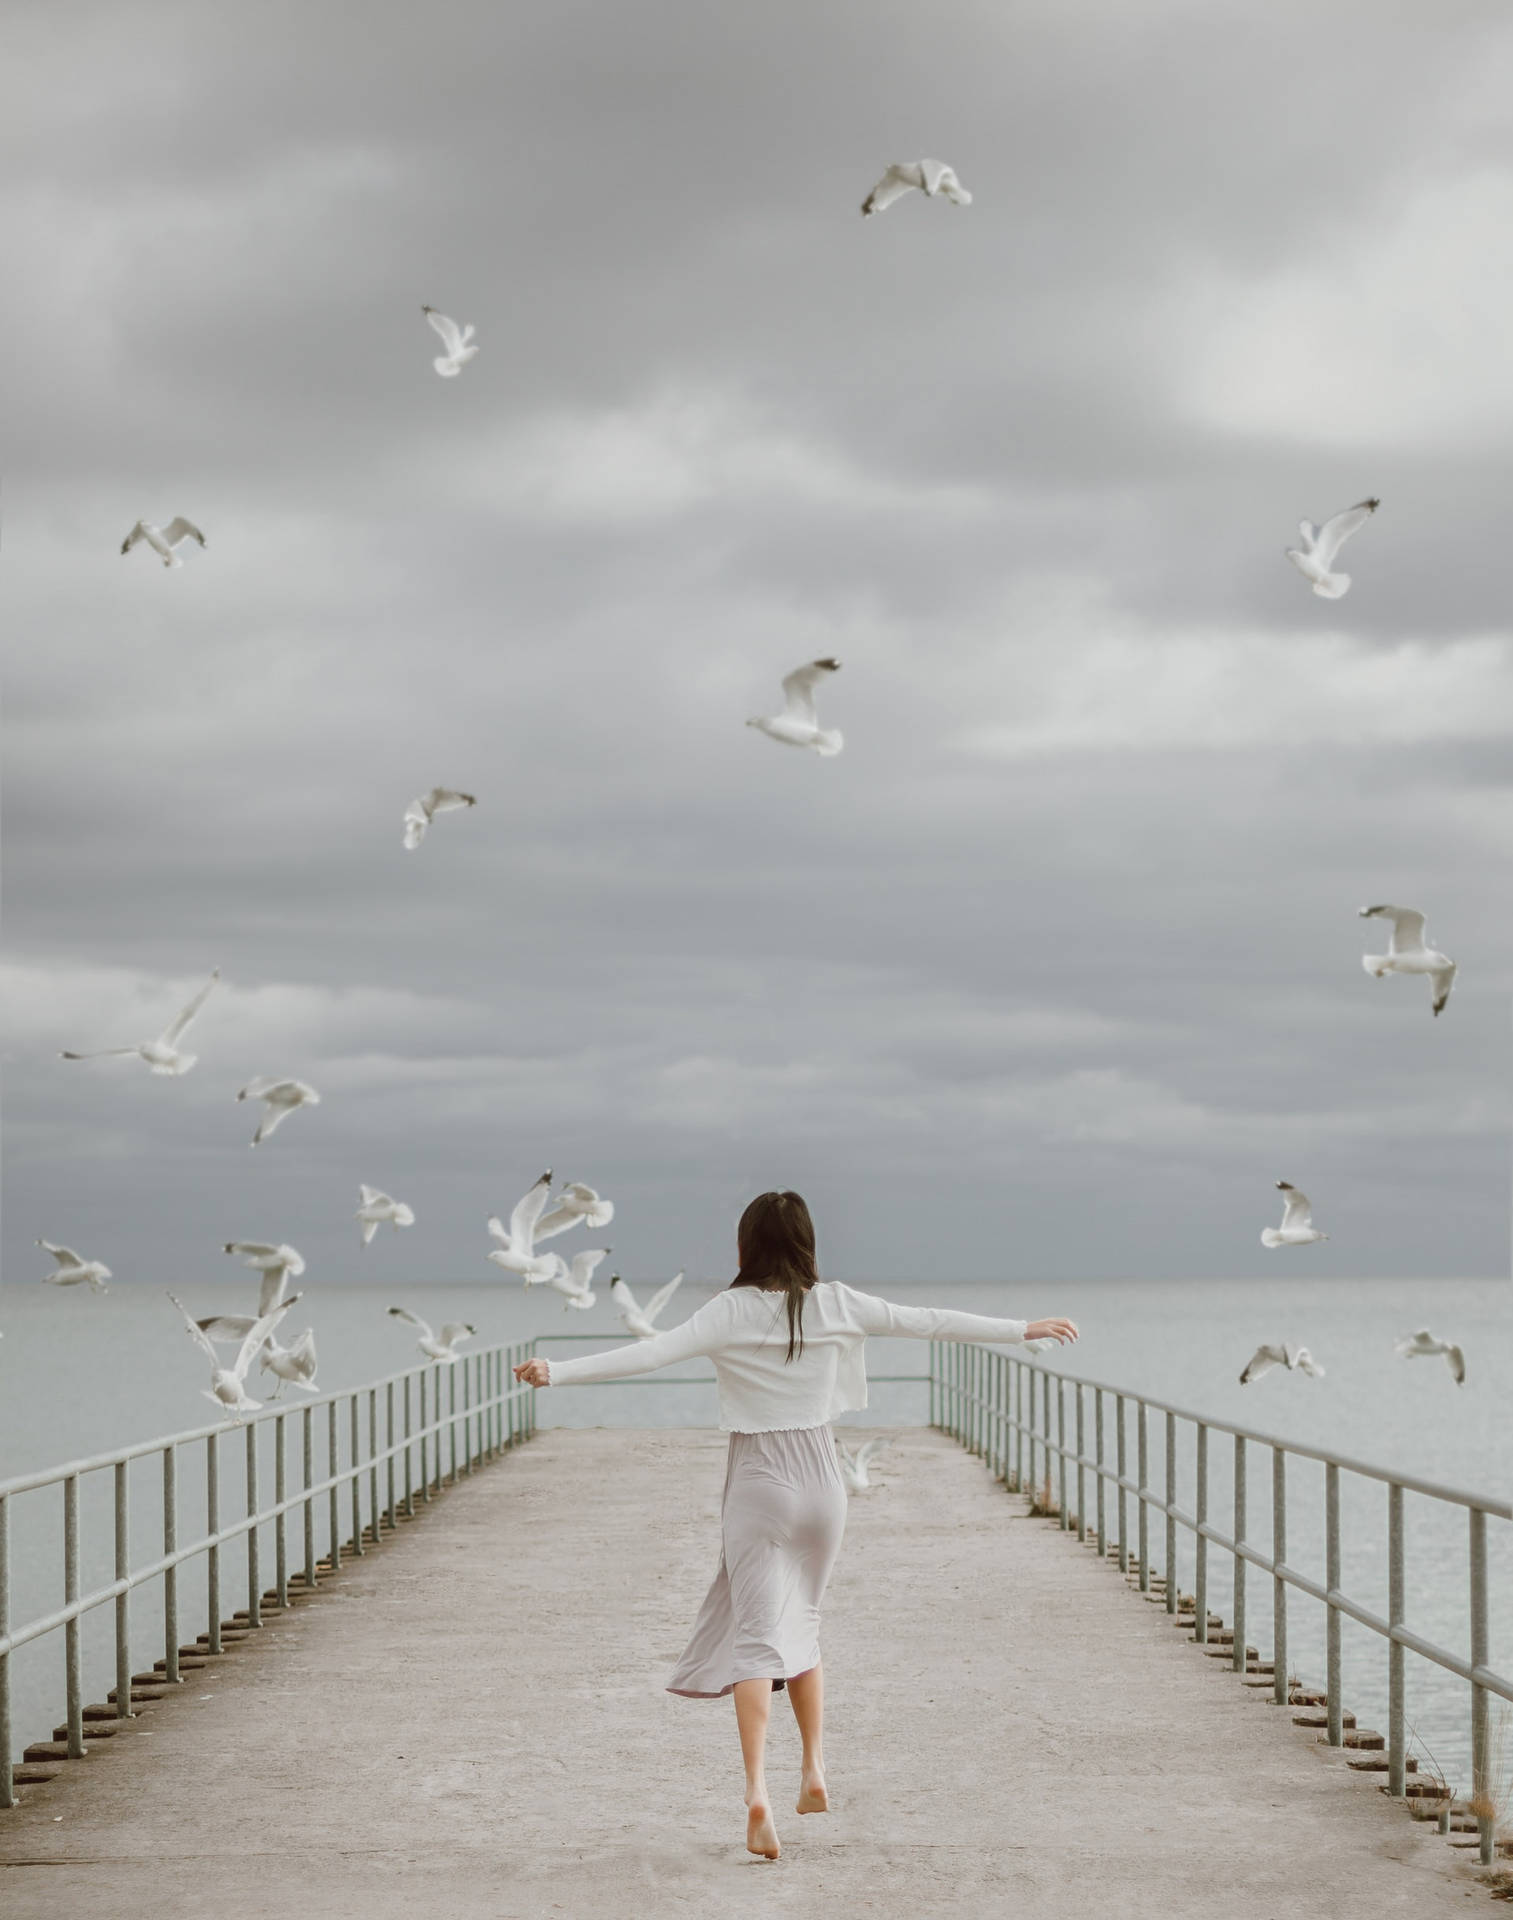 Seagull Birds Flying Over A Woman Wallpaper